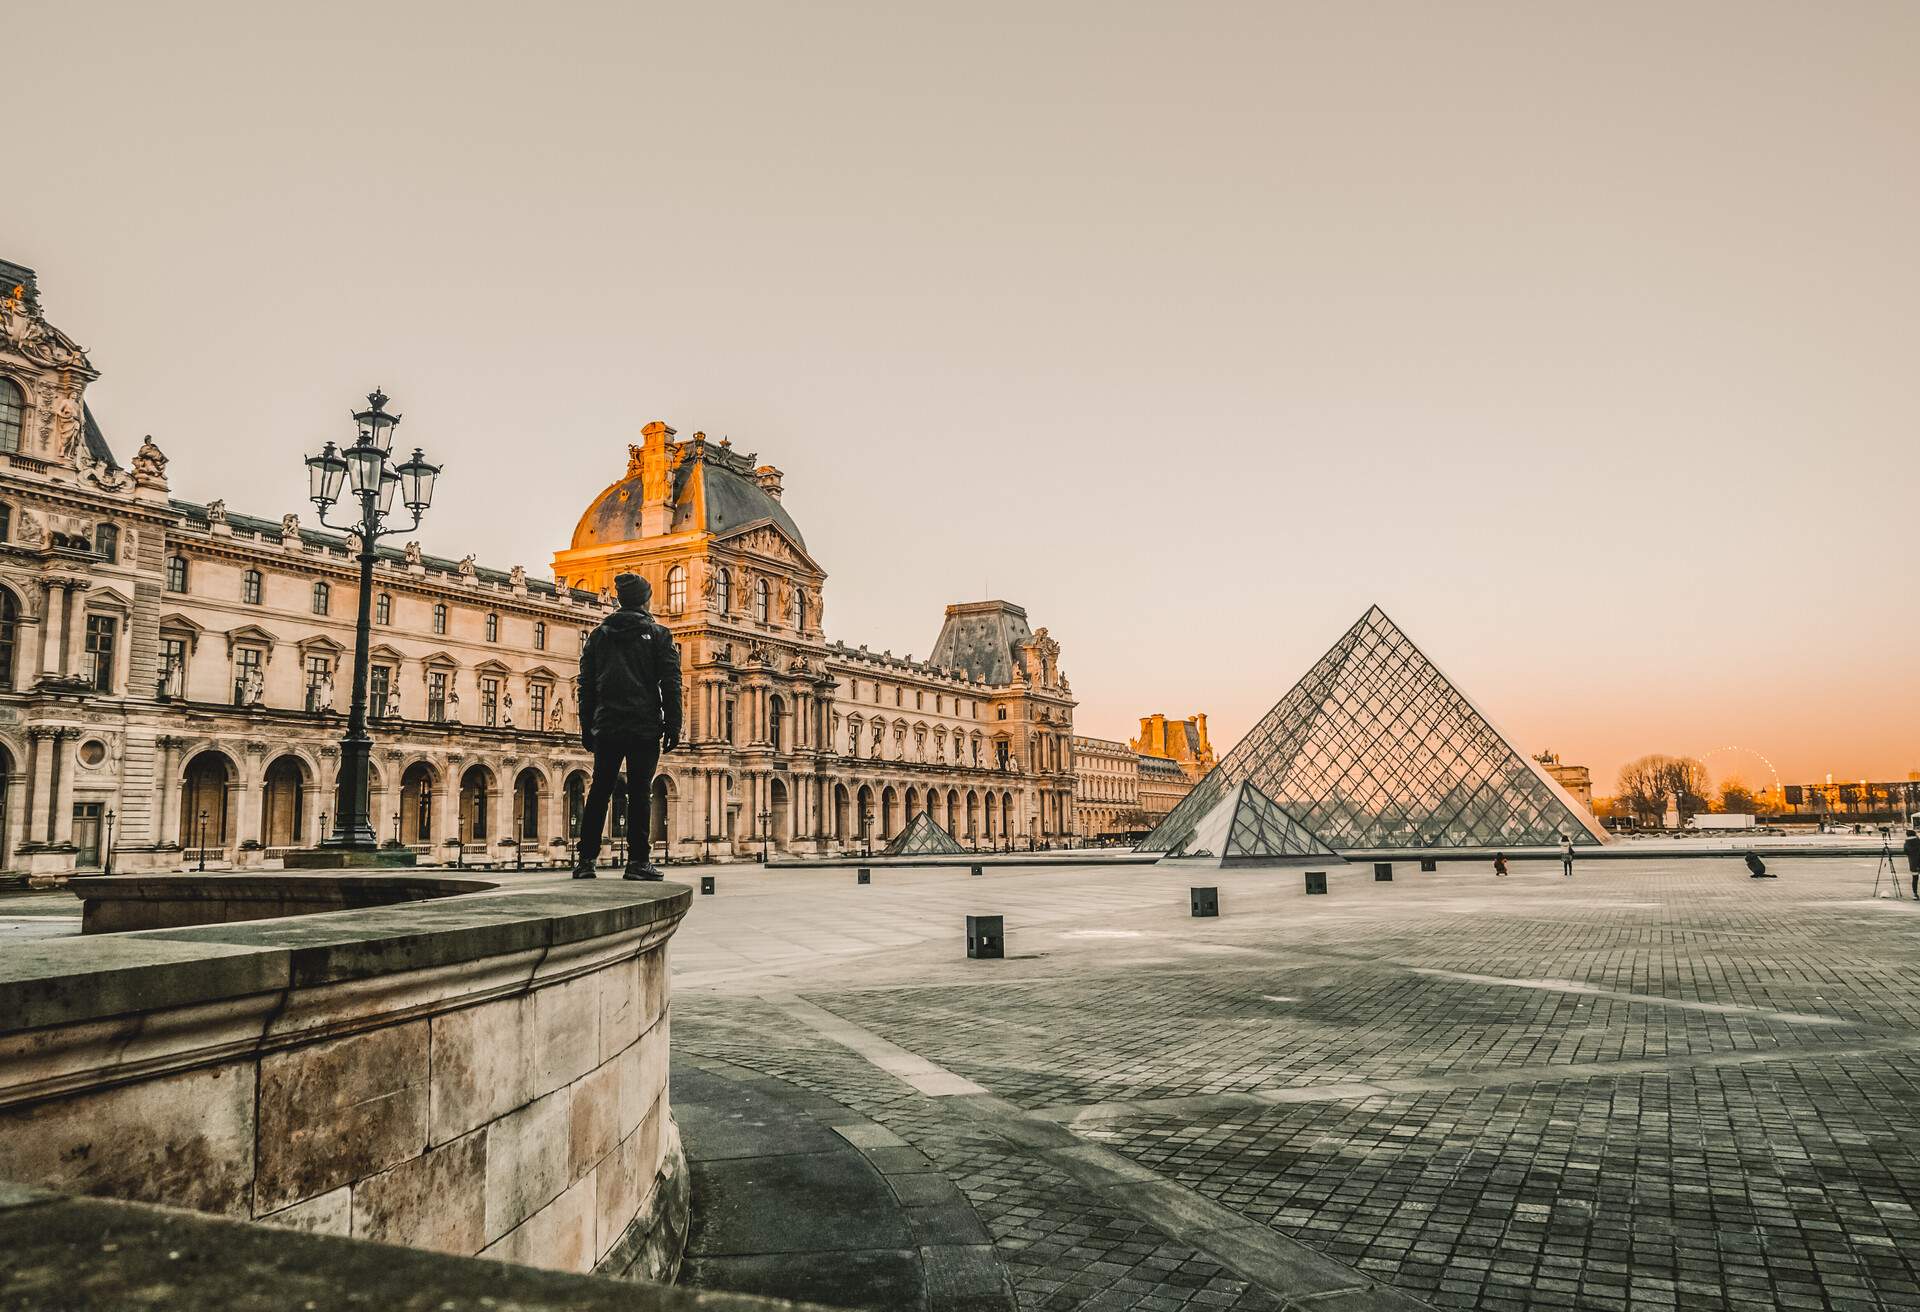 A man standing on a low wall overlooking the glass pyramids of the Louvre Museum.